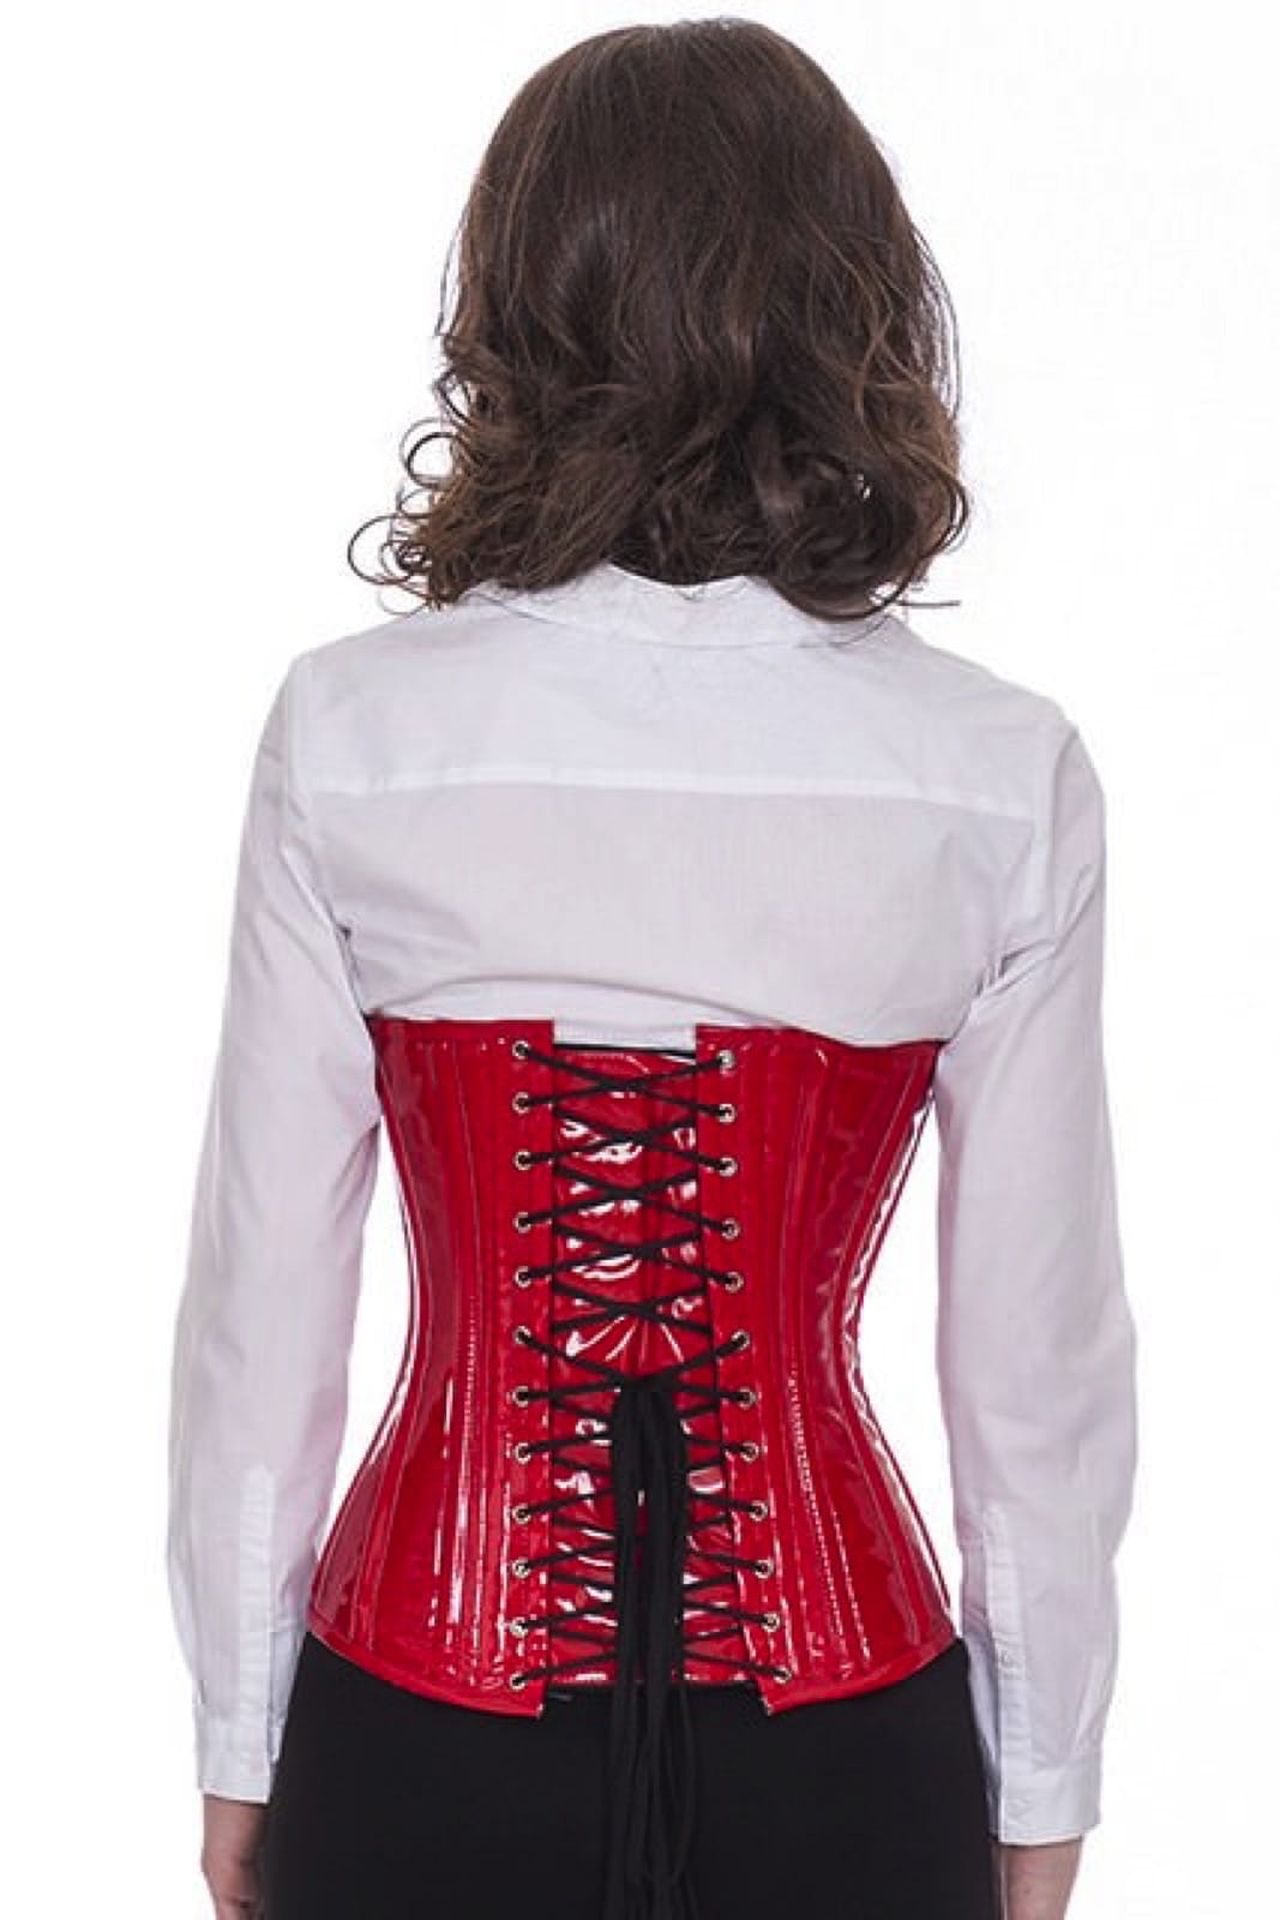 Corset red vinyl underbust with buckles pc71